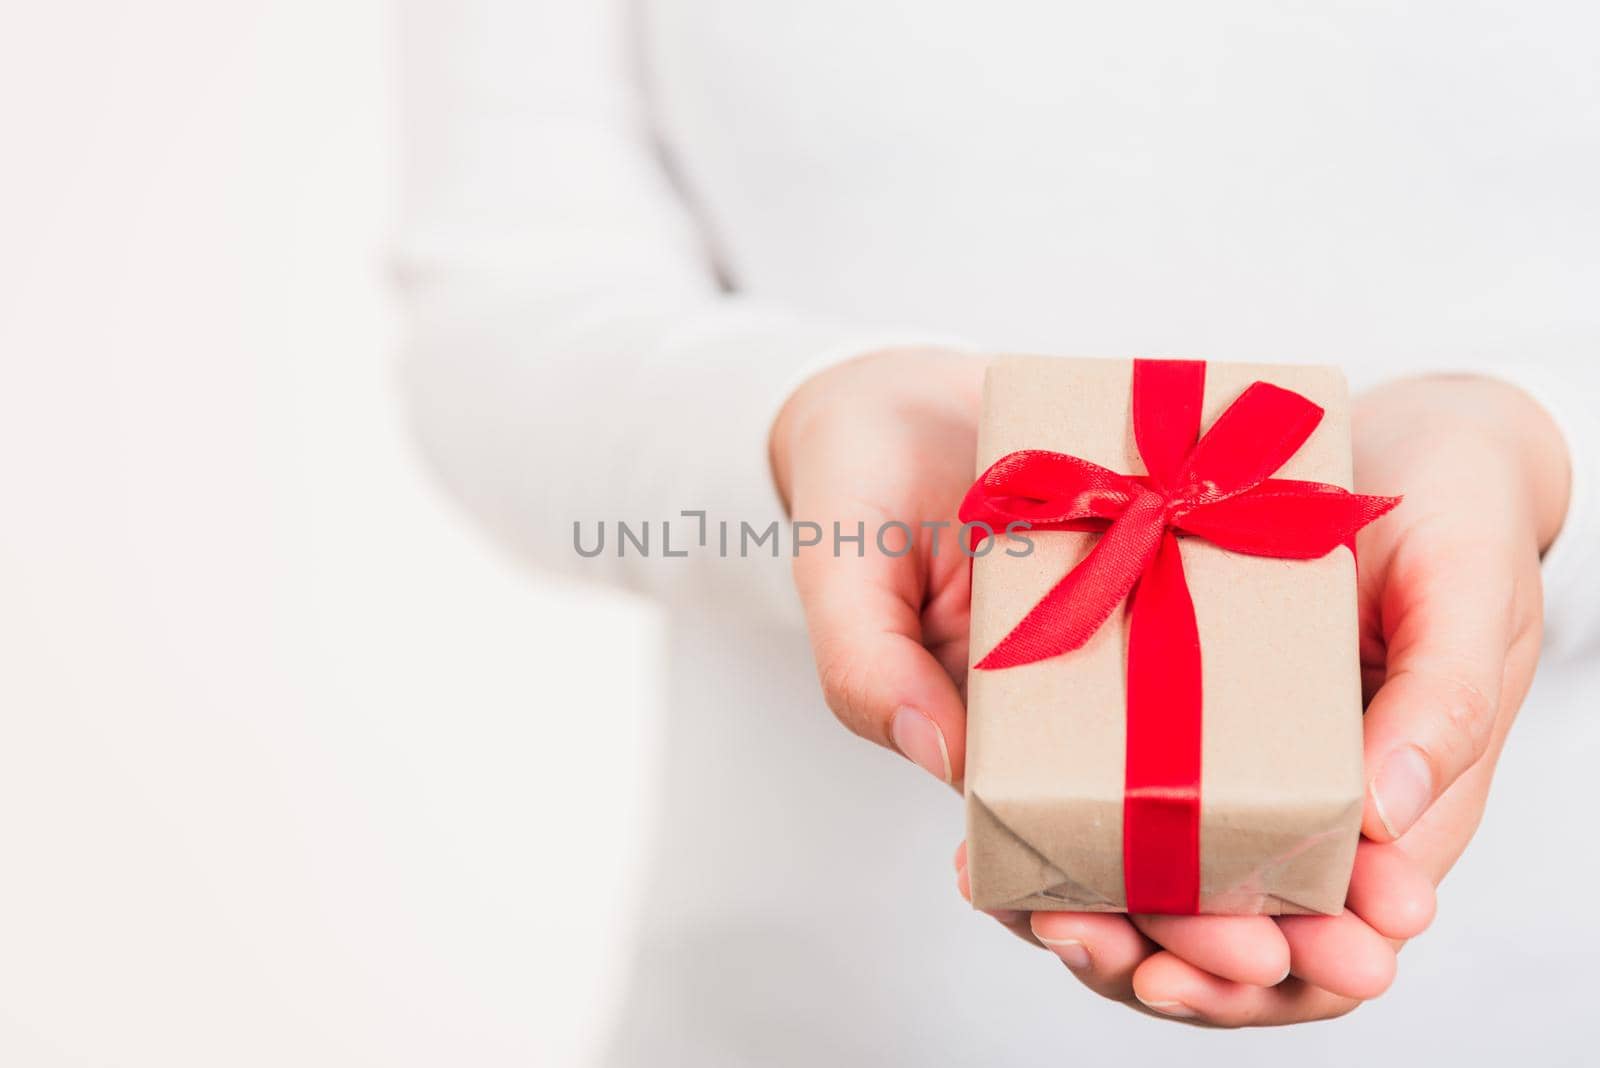 Valentine Day. Female beauty hands holding small gift package box present wrapped paper with ribbon isolated on white background, Christmas, New year, Birthday holiday background concept